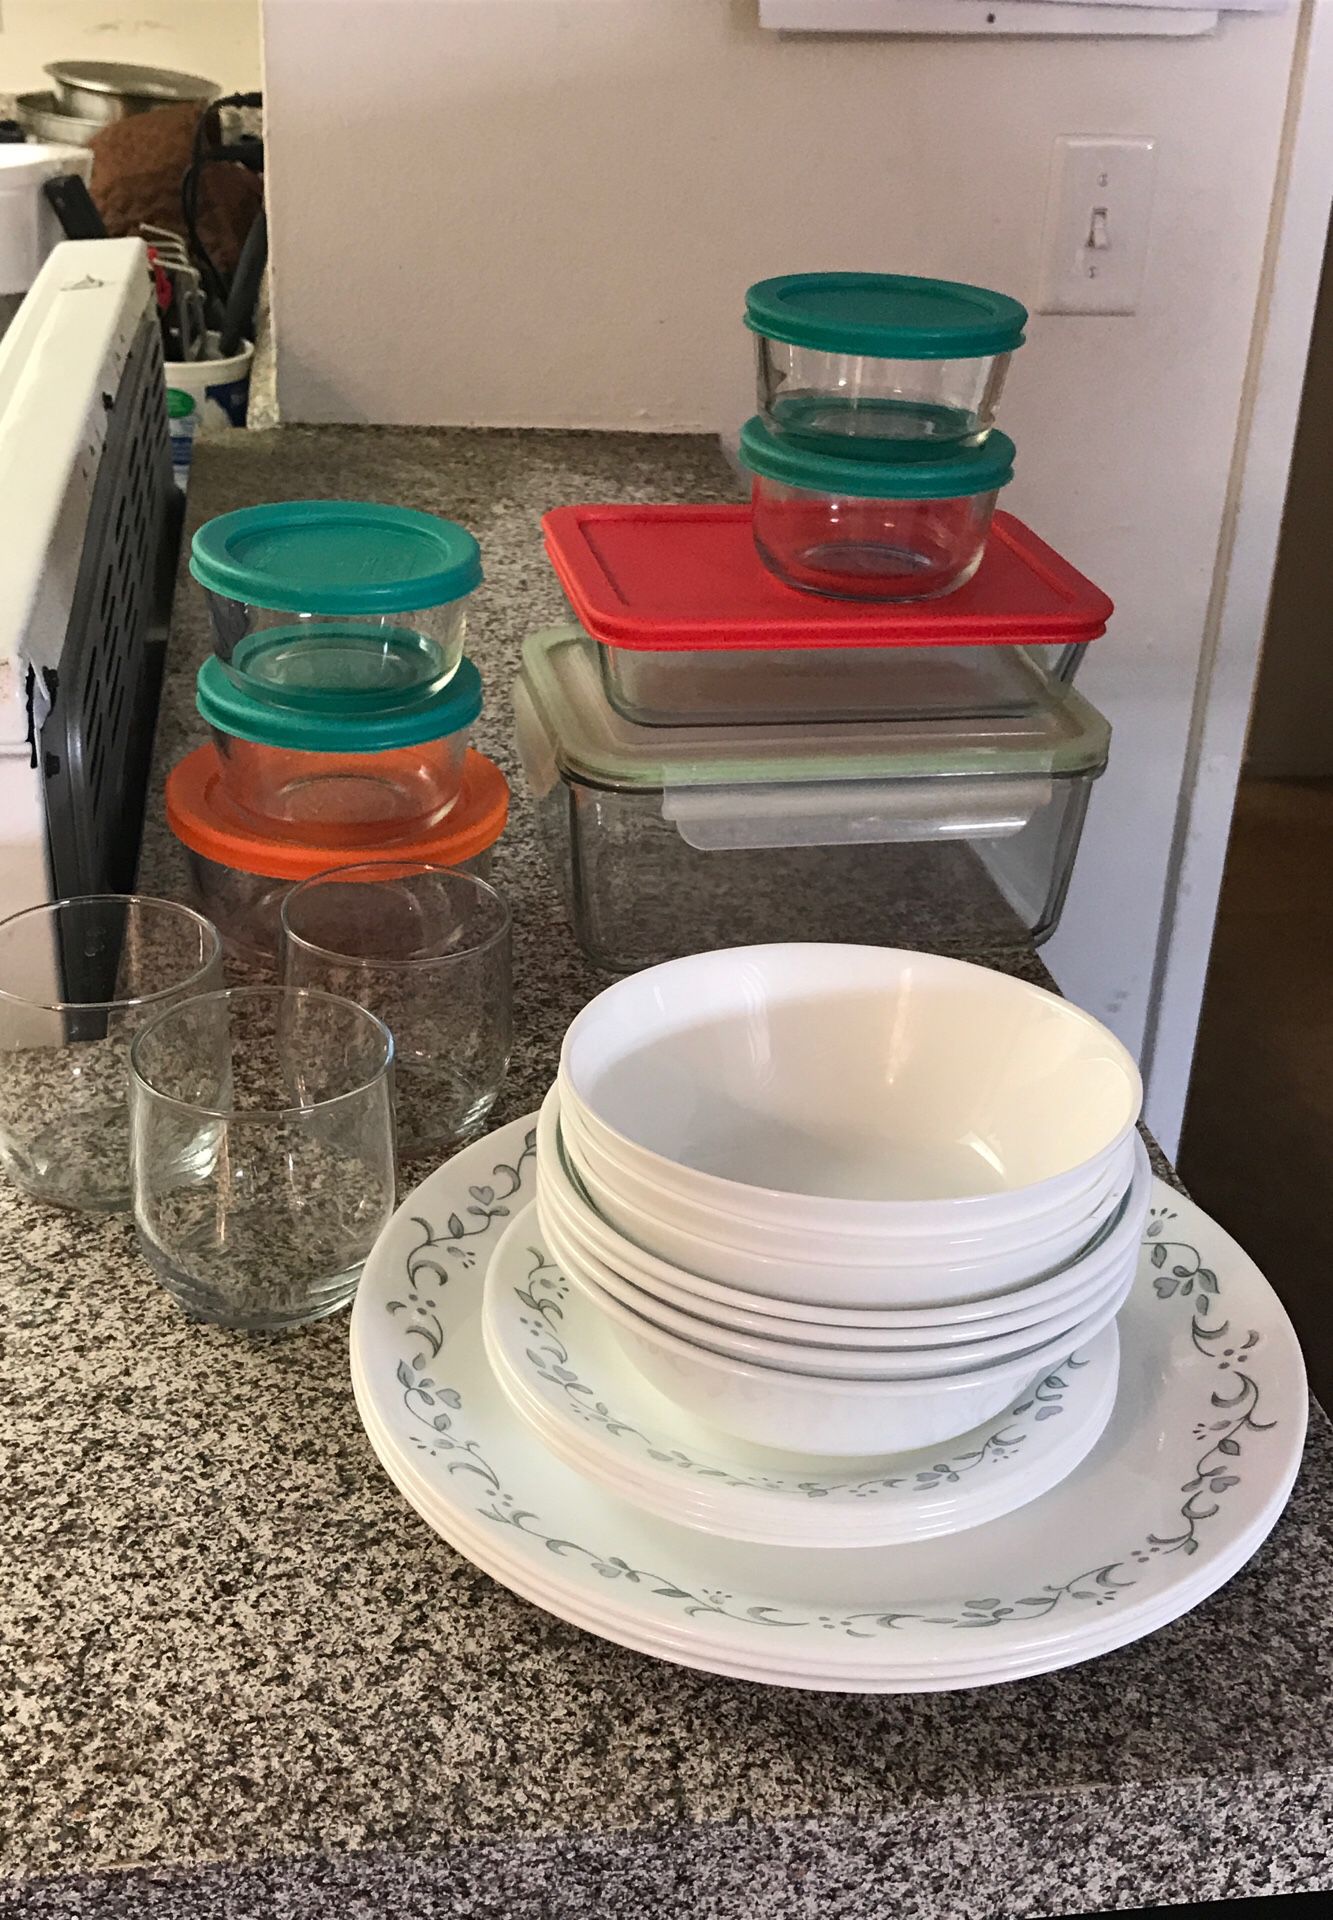 Correlle plate,bowl,small plates, Pyrex glass containers, juice mugs